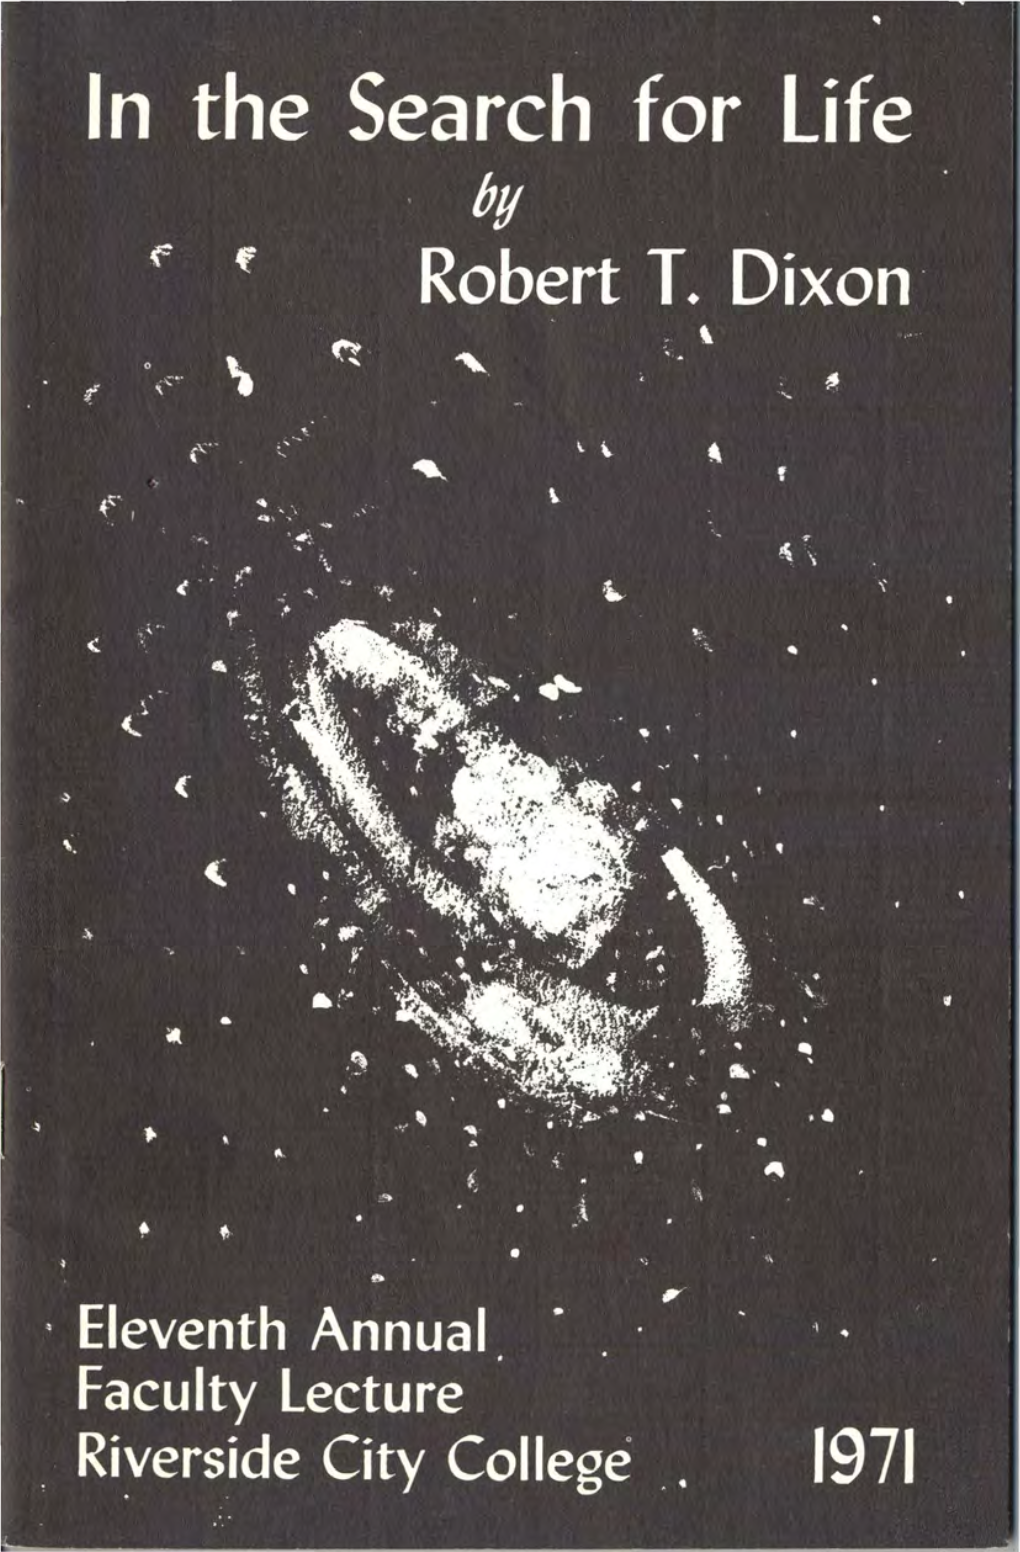 1971 Dixon-In the Search for Life